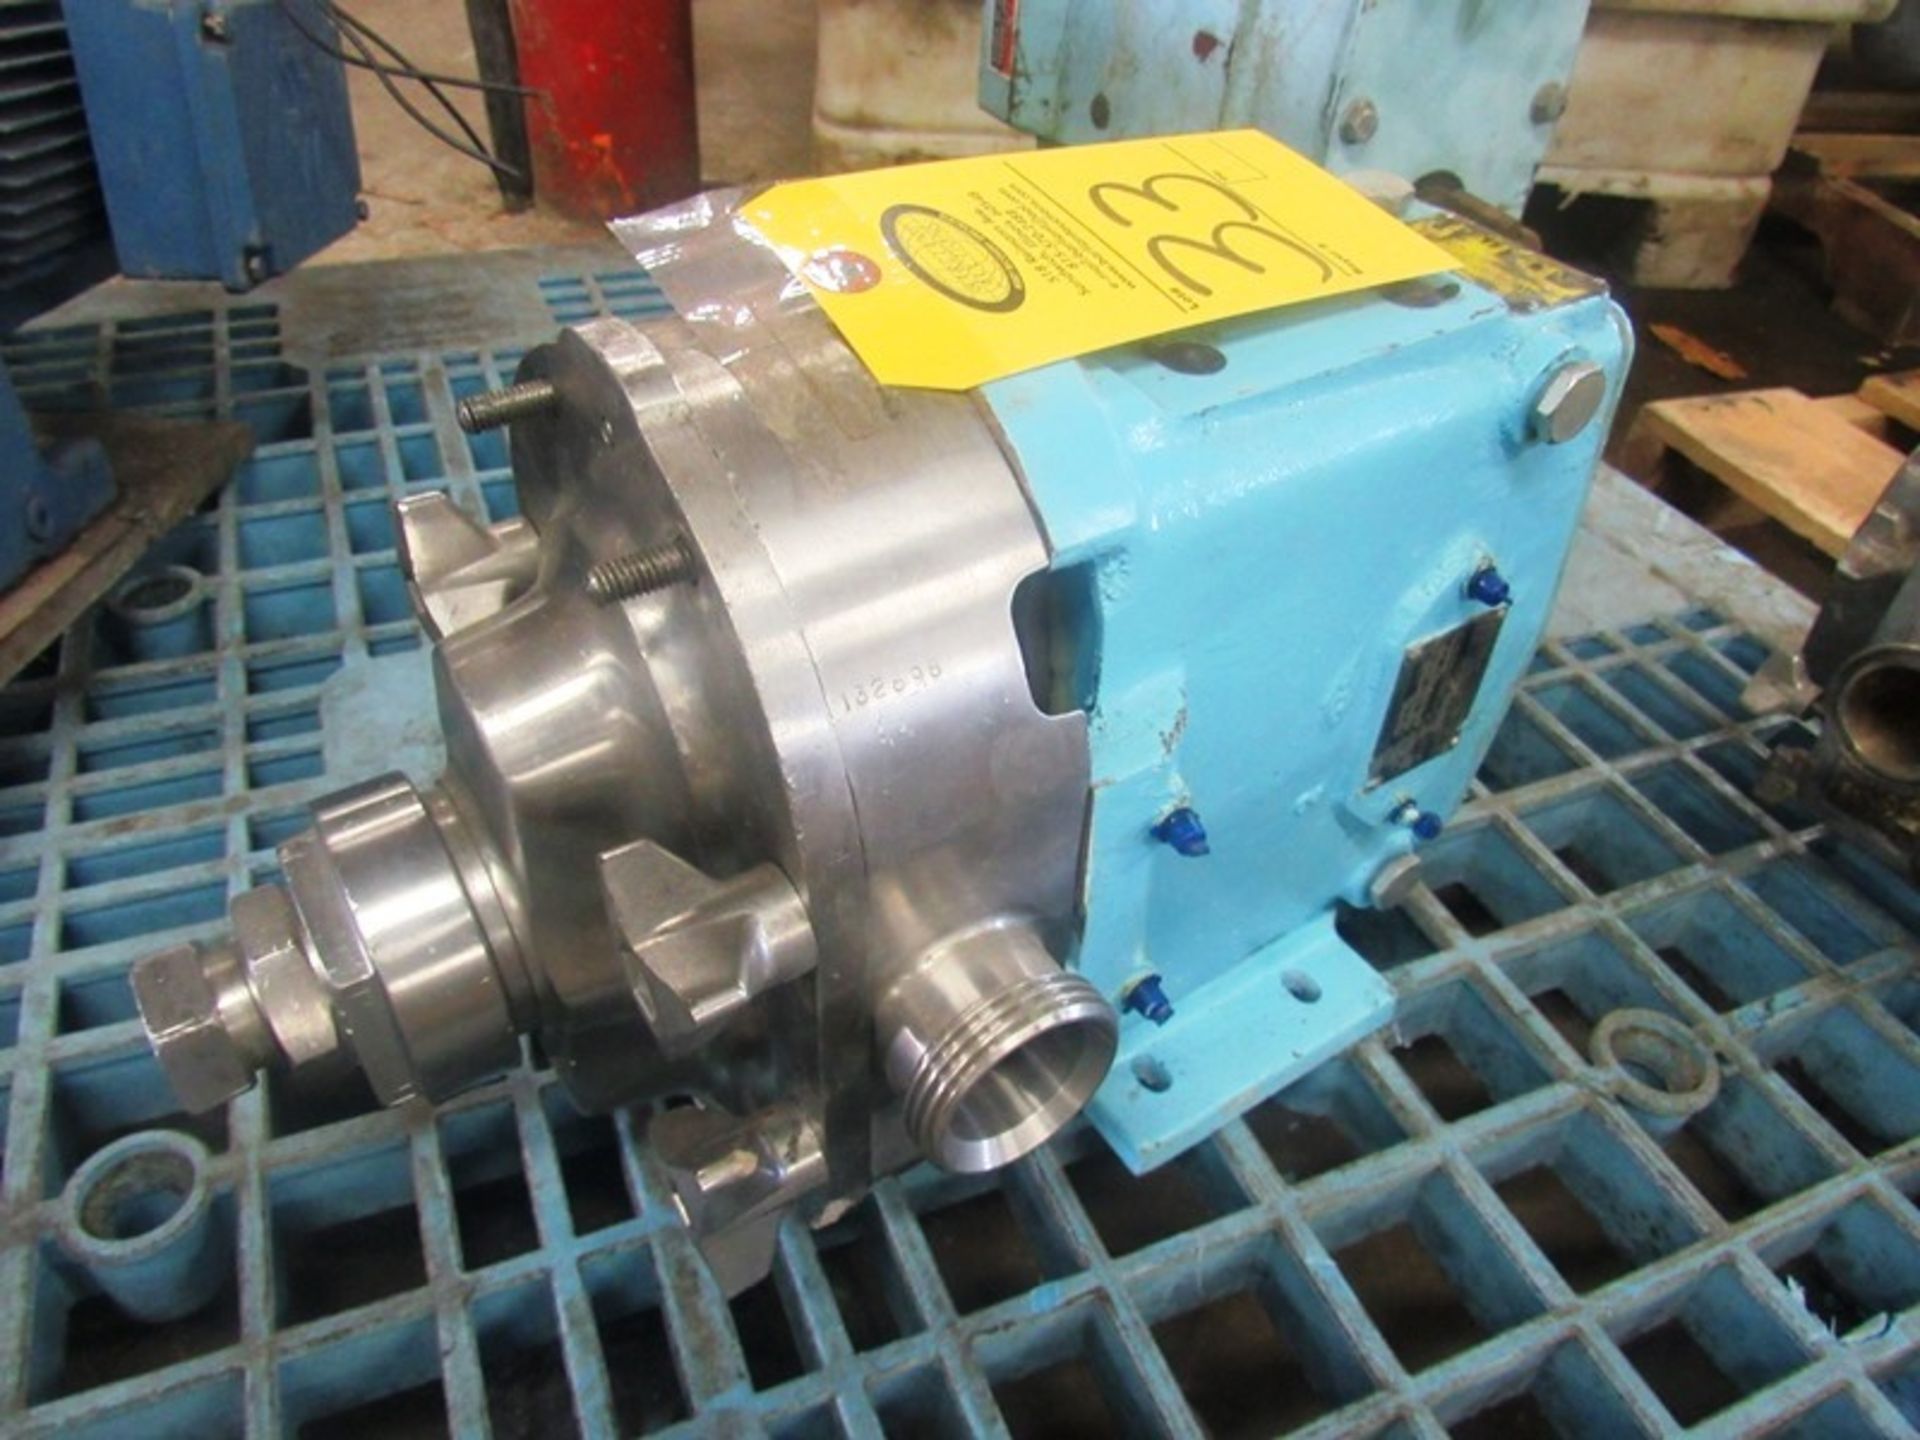 Waukesha Mdl. 030 Positive Displacement Pump, 1 1/2" inlet/outlet